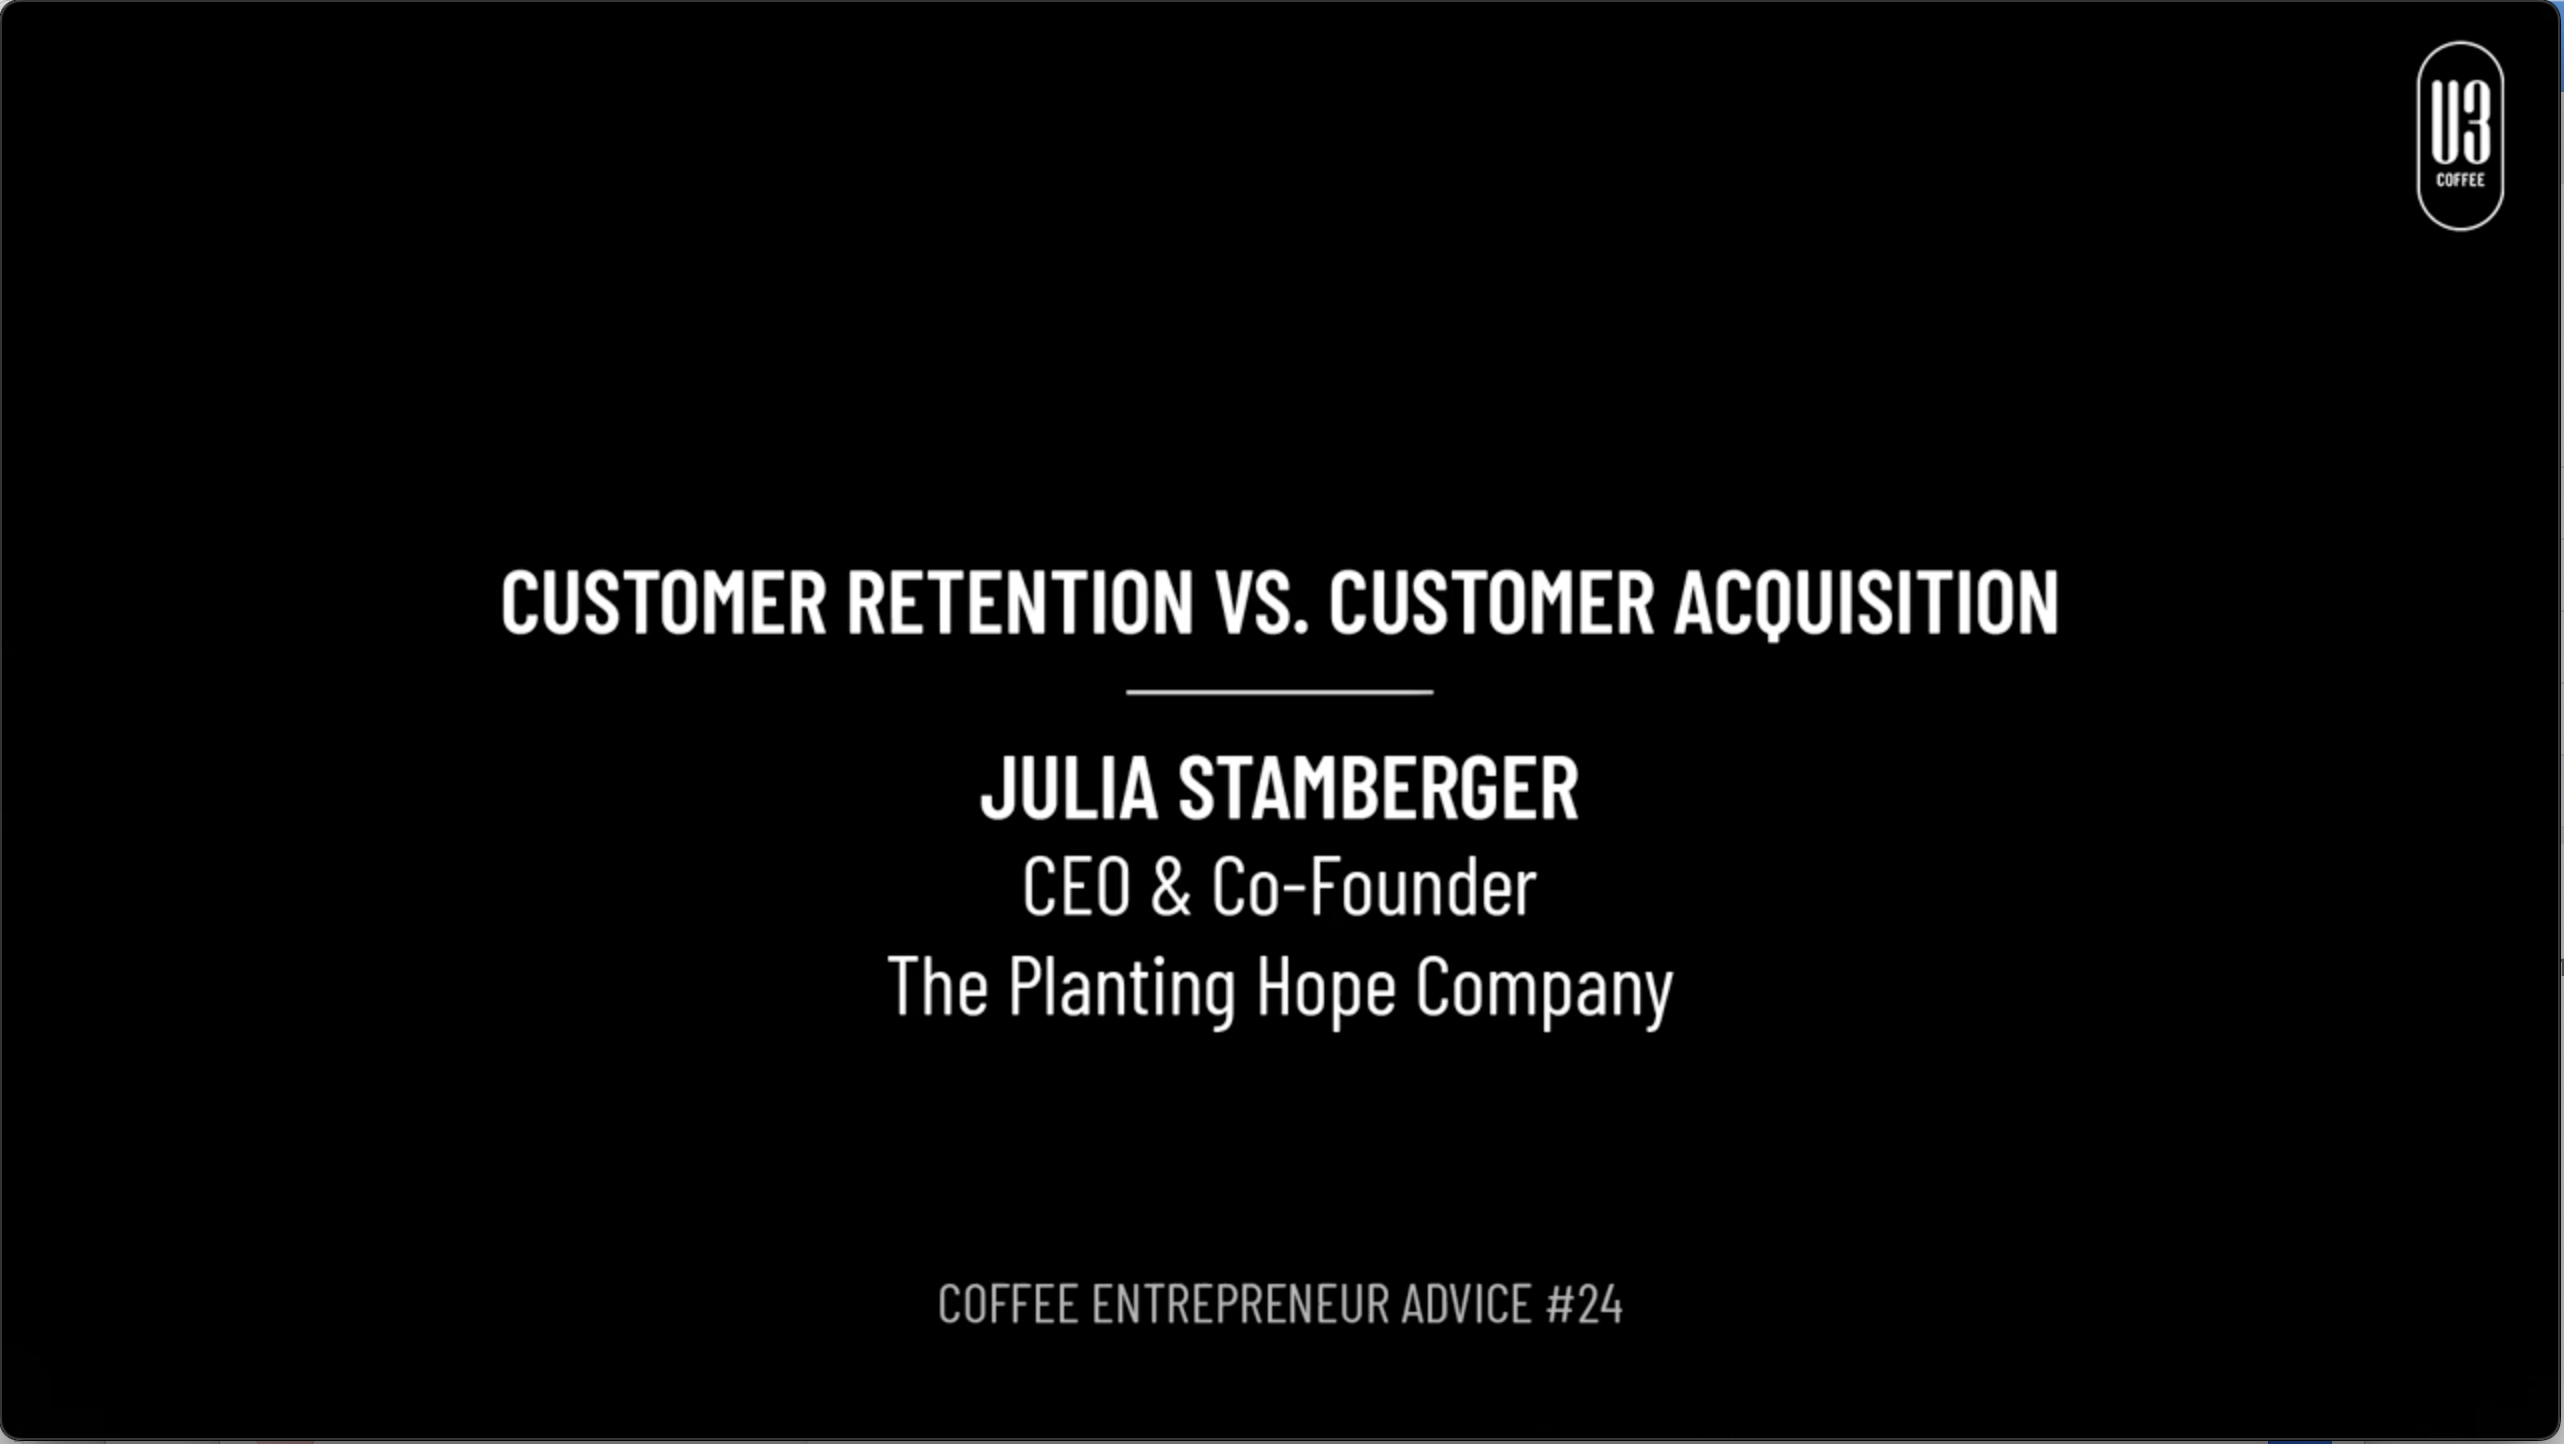 Julia Stamberger, CEO & Co-Founder of The Planting Hope Company gives her advice on customer retention vs. customer acquisition.